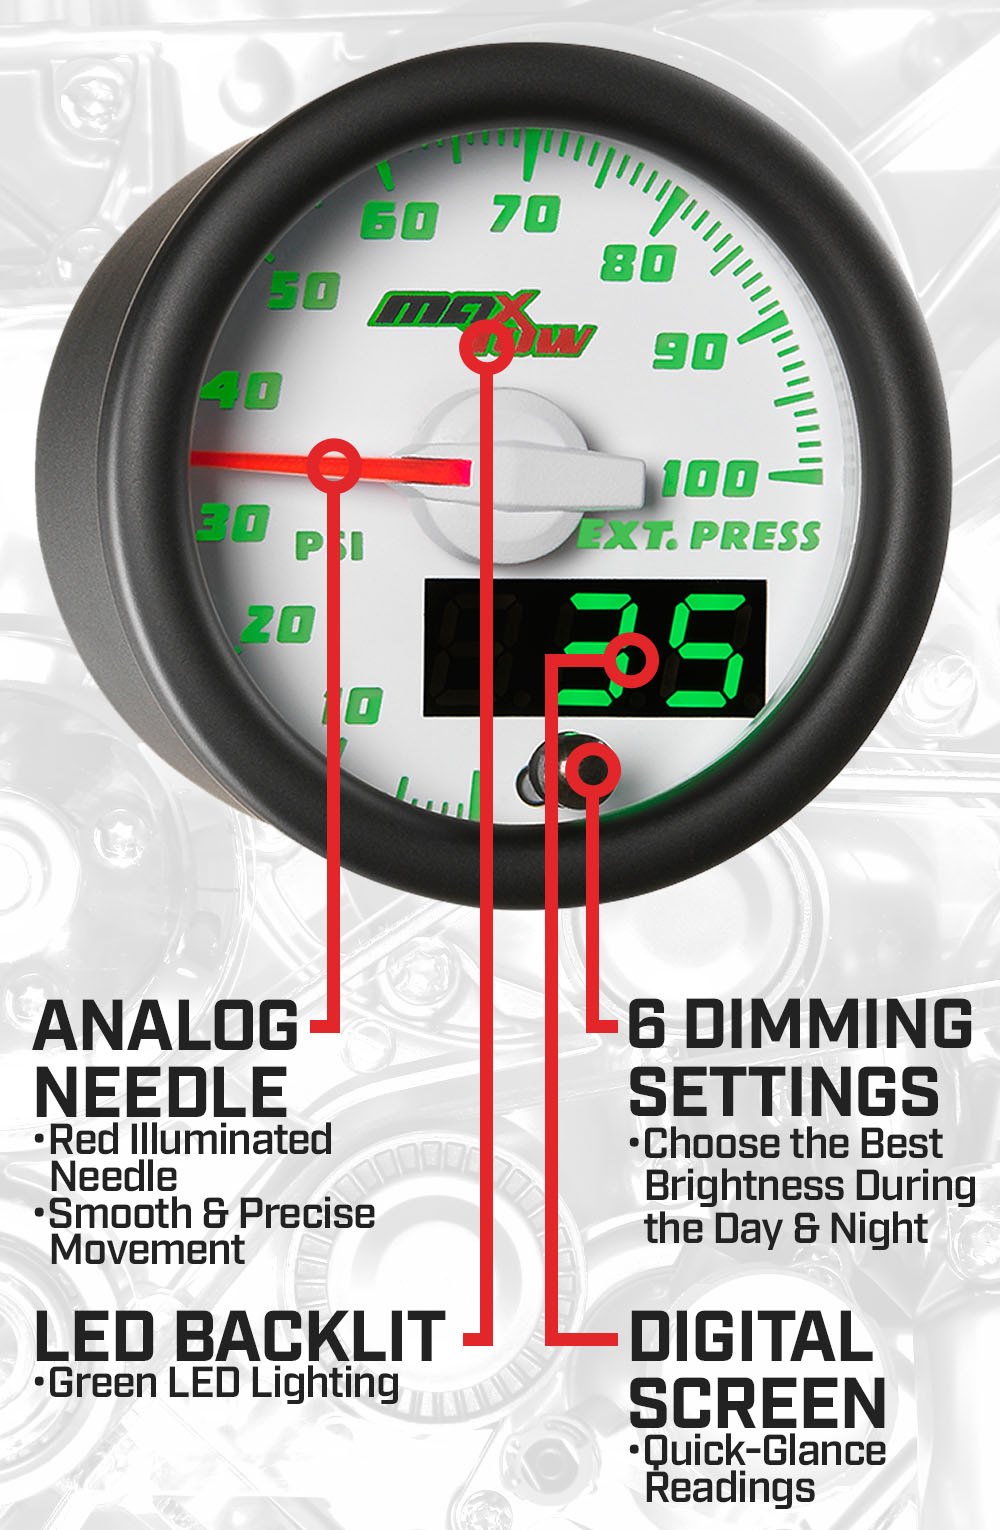 White & Green Double Vision 100 PSI Drive Pressure Gauge Features